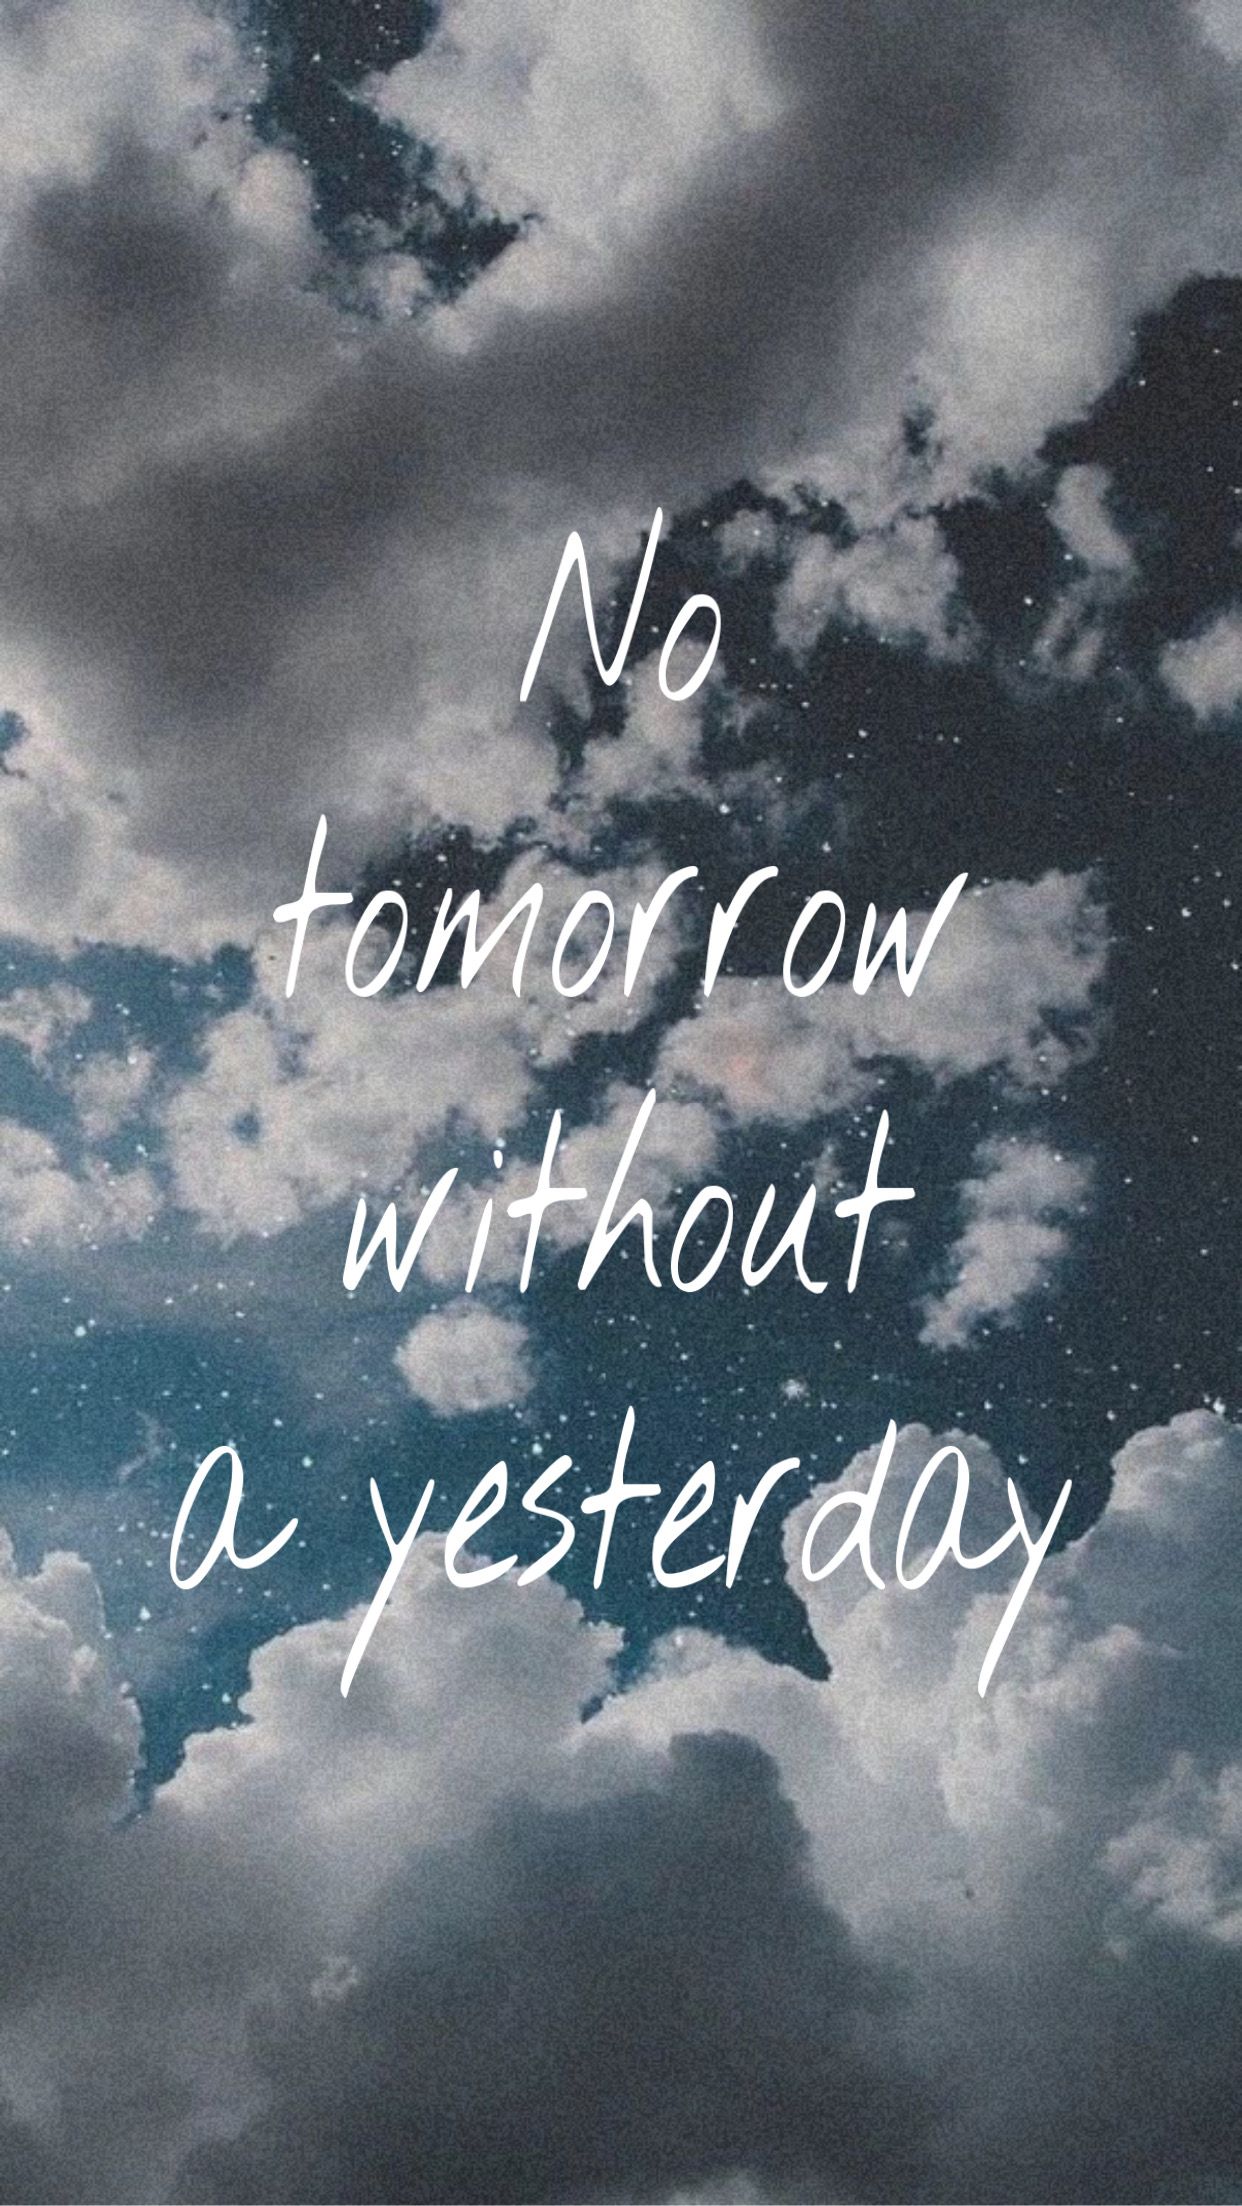 No tomorrow without a yesterday. Imagine dragons quotes, Imagine dragons, Imagine